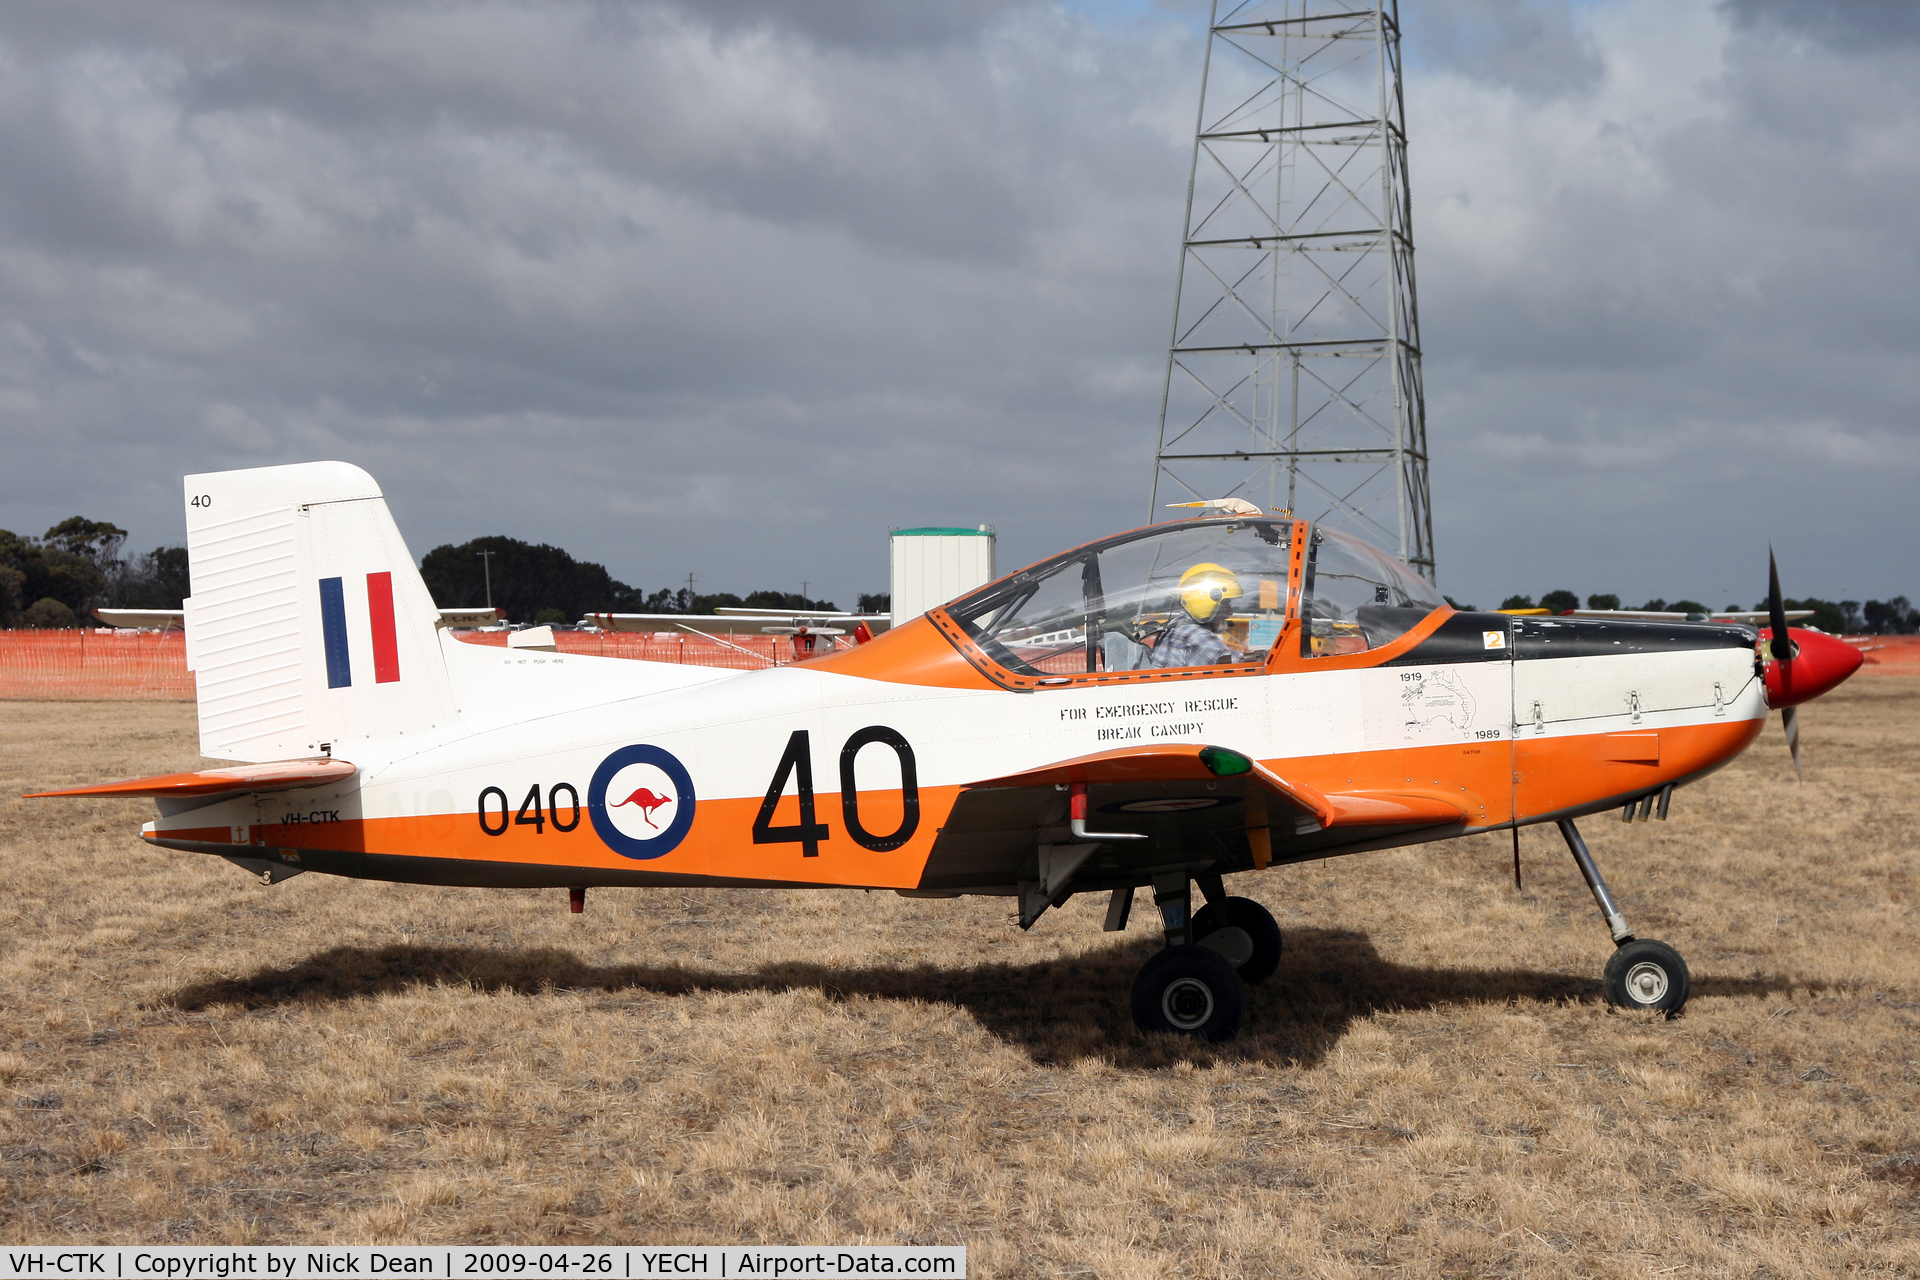 VH-CTK, 1975 New Zealand CT-4A Airtrainer C/N 040, YECH